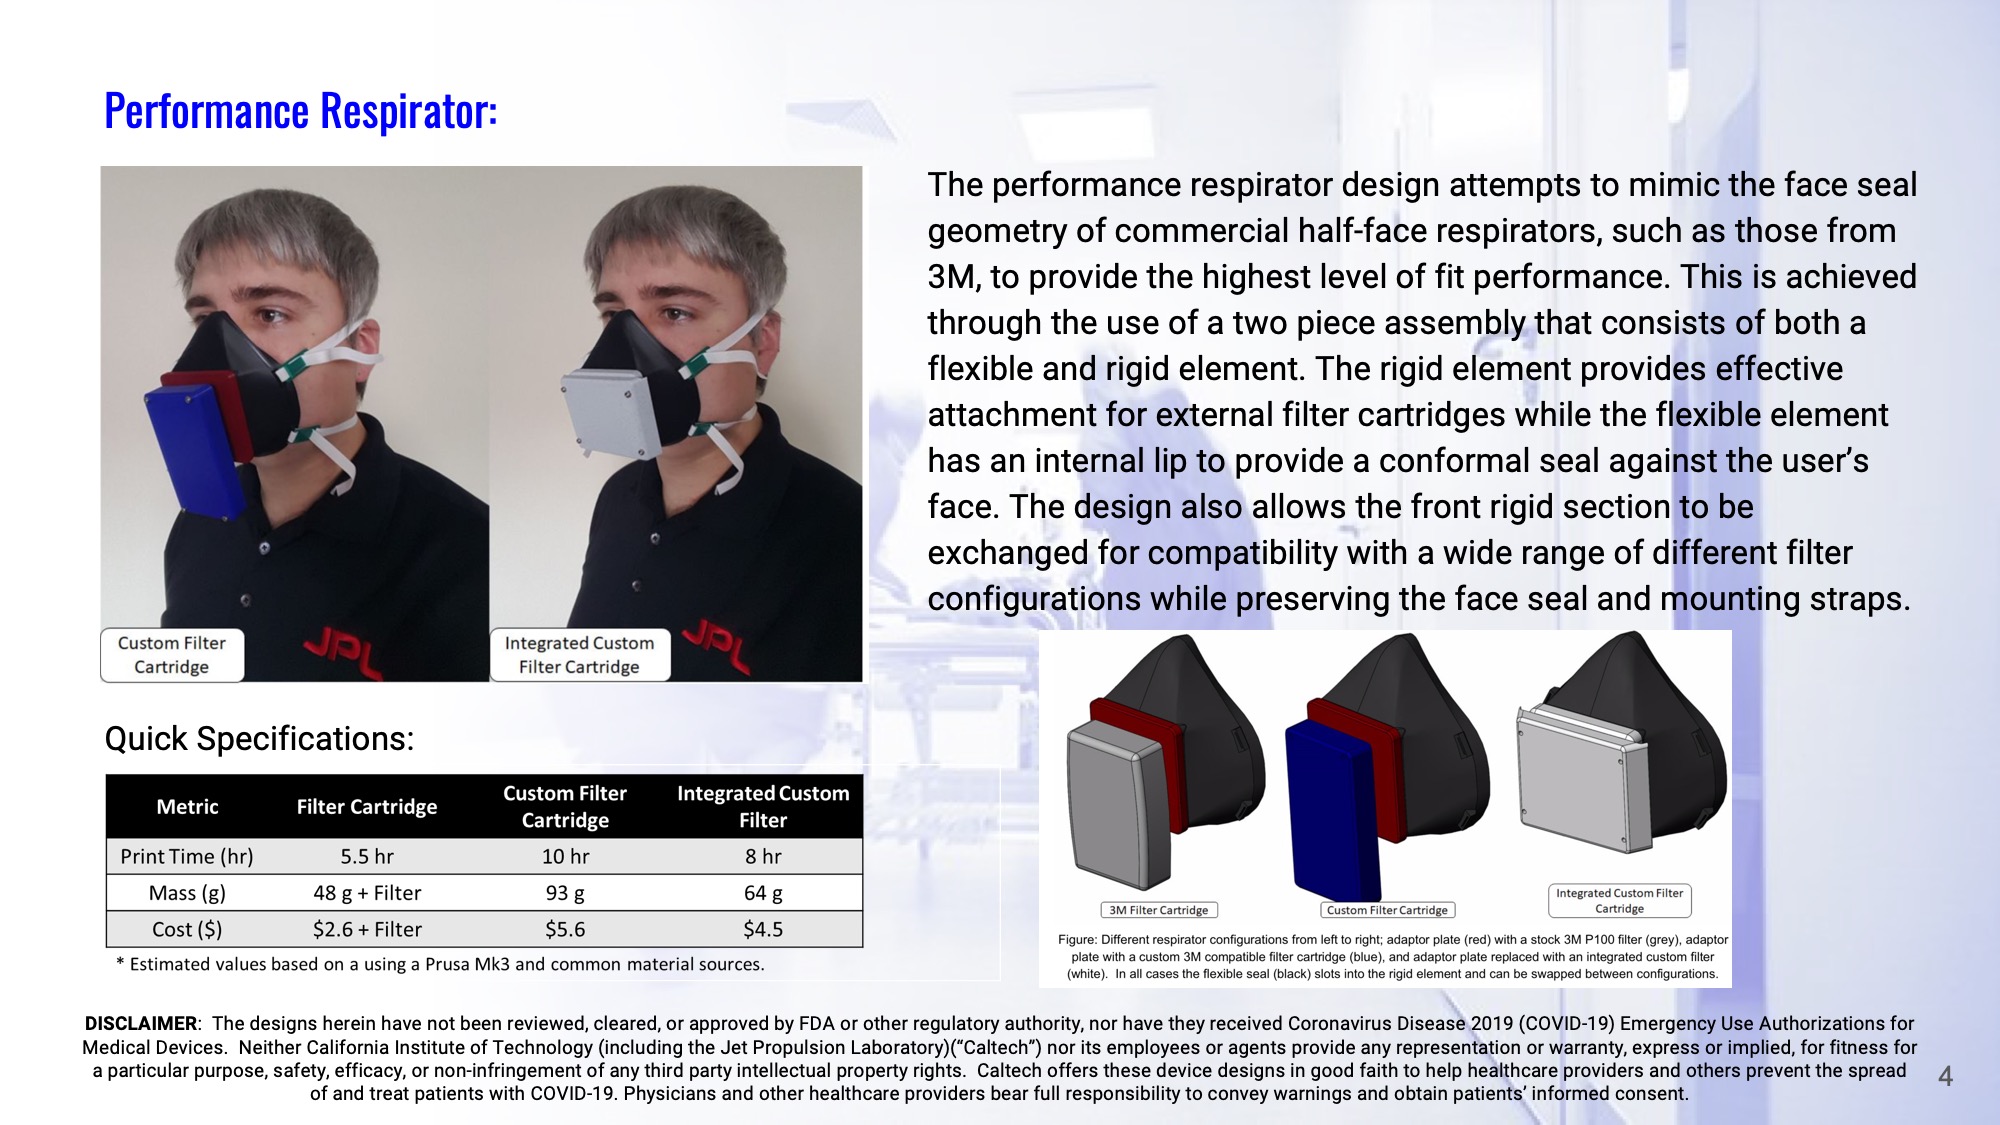 Slide 4: Performance Respirator: The performance respirator design attempts to mimic the face seal geometry of commercial half-face respirators, such as those from 3M, to provide the highest level of fit performance. This is achieved through the use of a two piece assembly that consists of both a flexible and rigid element. The rigid element provides effective attachment for external filter cartridges while the flexible element has an internal lip to provide a conformal seal against the user’s face. The design also allows the front rigid section to be exchanged for compatibility with a wide range of different filter configurations while preserving the face seal and mounting straps.